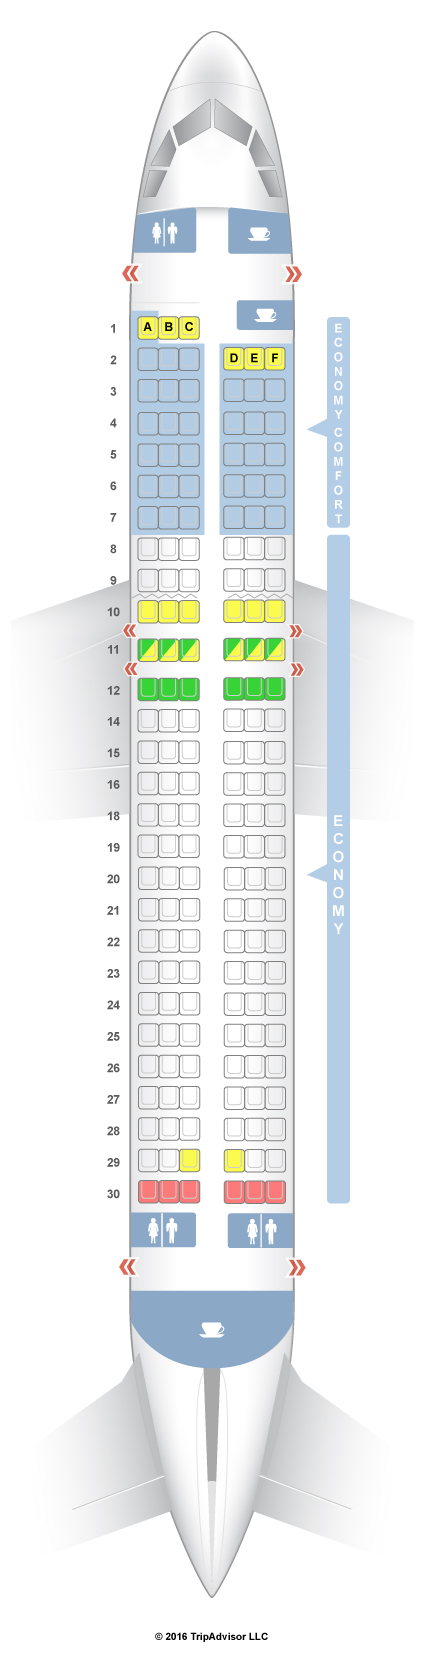 Airbus Industrie A318 Seating Chart